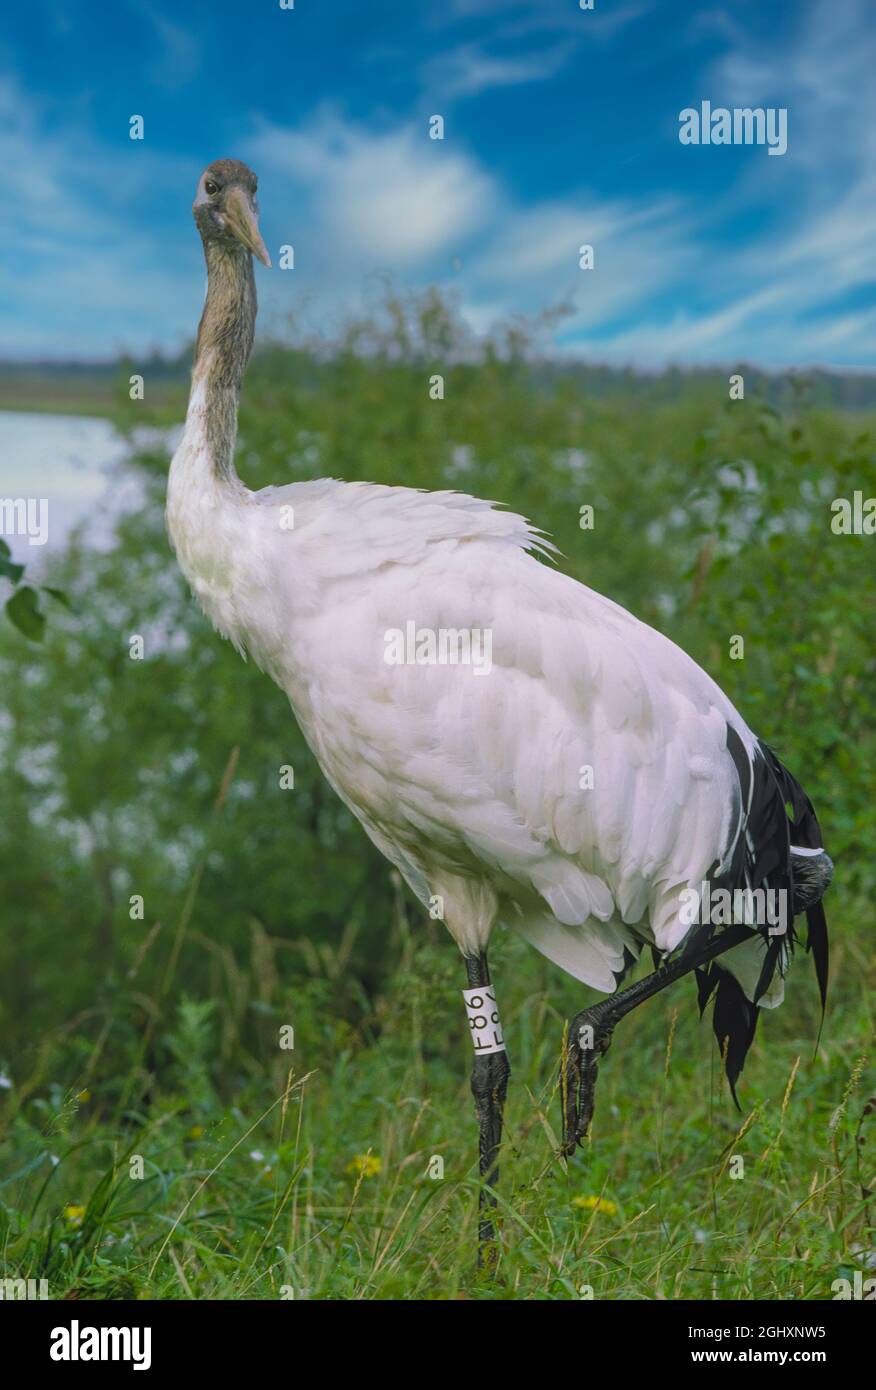 The red-crowned crane, also called the Manchurian crane or Japanese crane, is a large East Asian crane among the rarest cranes in the world. In some parts of its range, it is known as a symbol of luck, longevity, and fidelity. Endangered species. Stock Photo